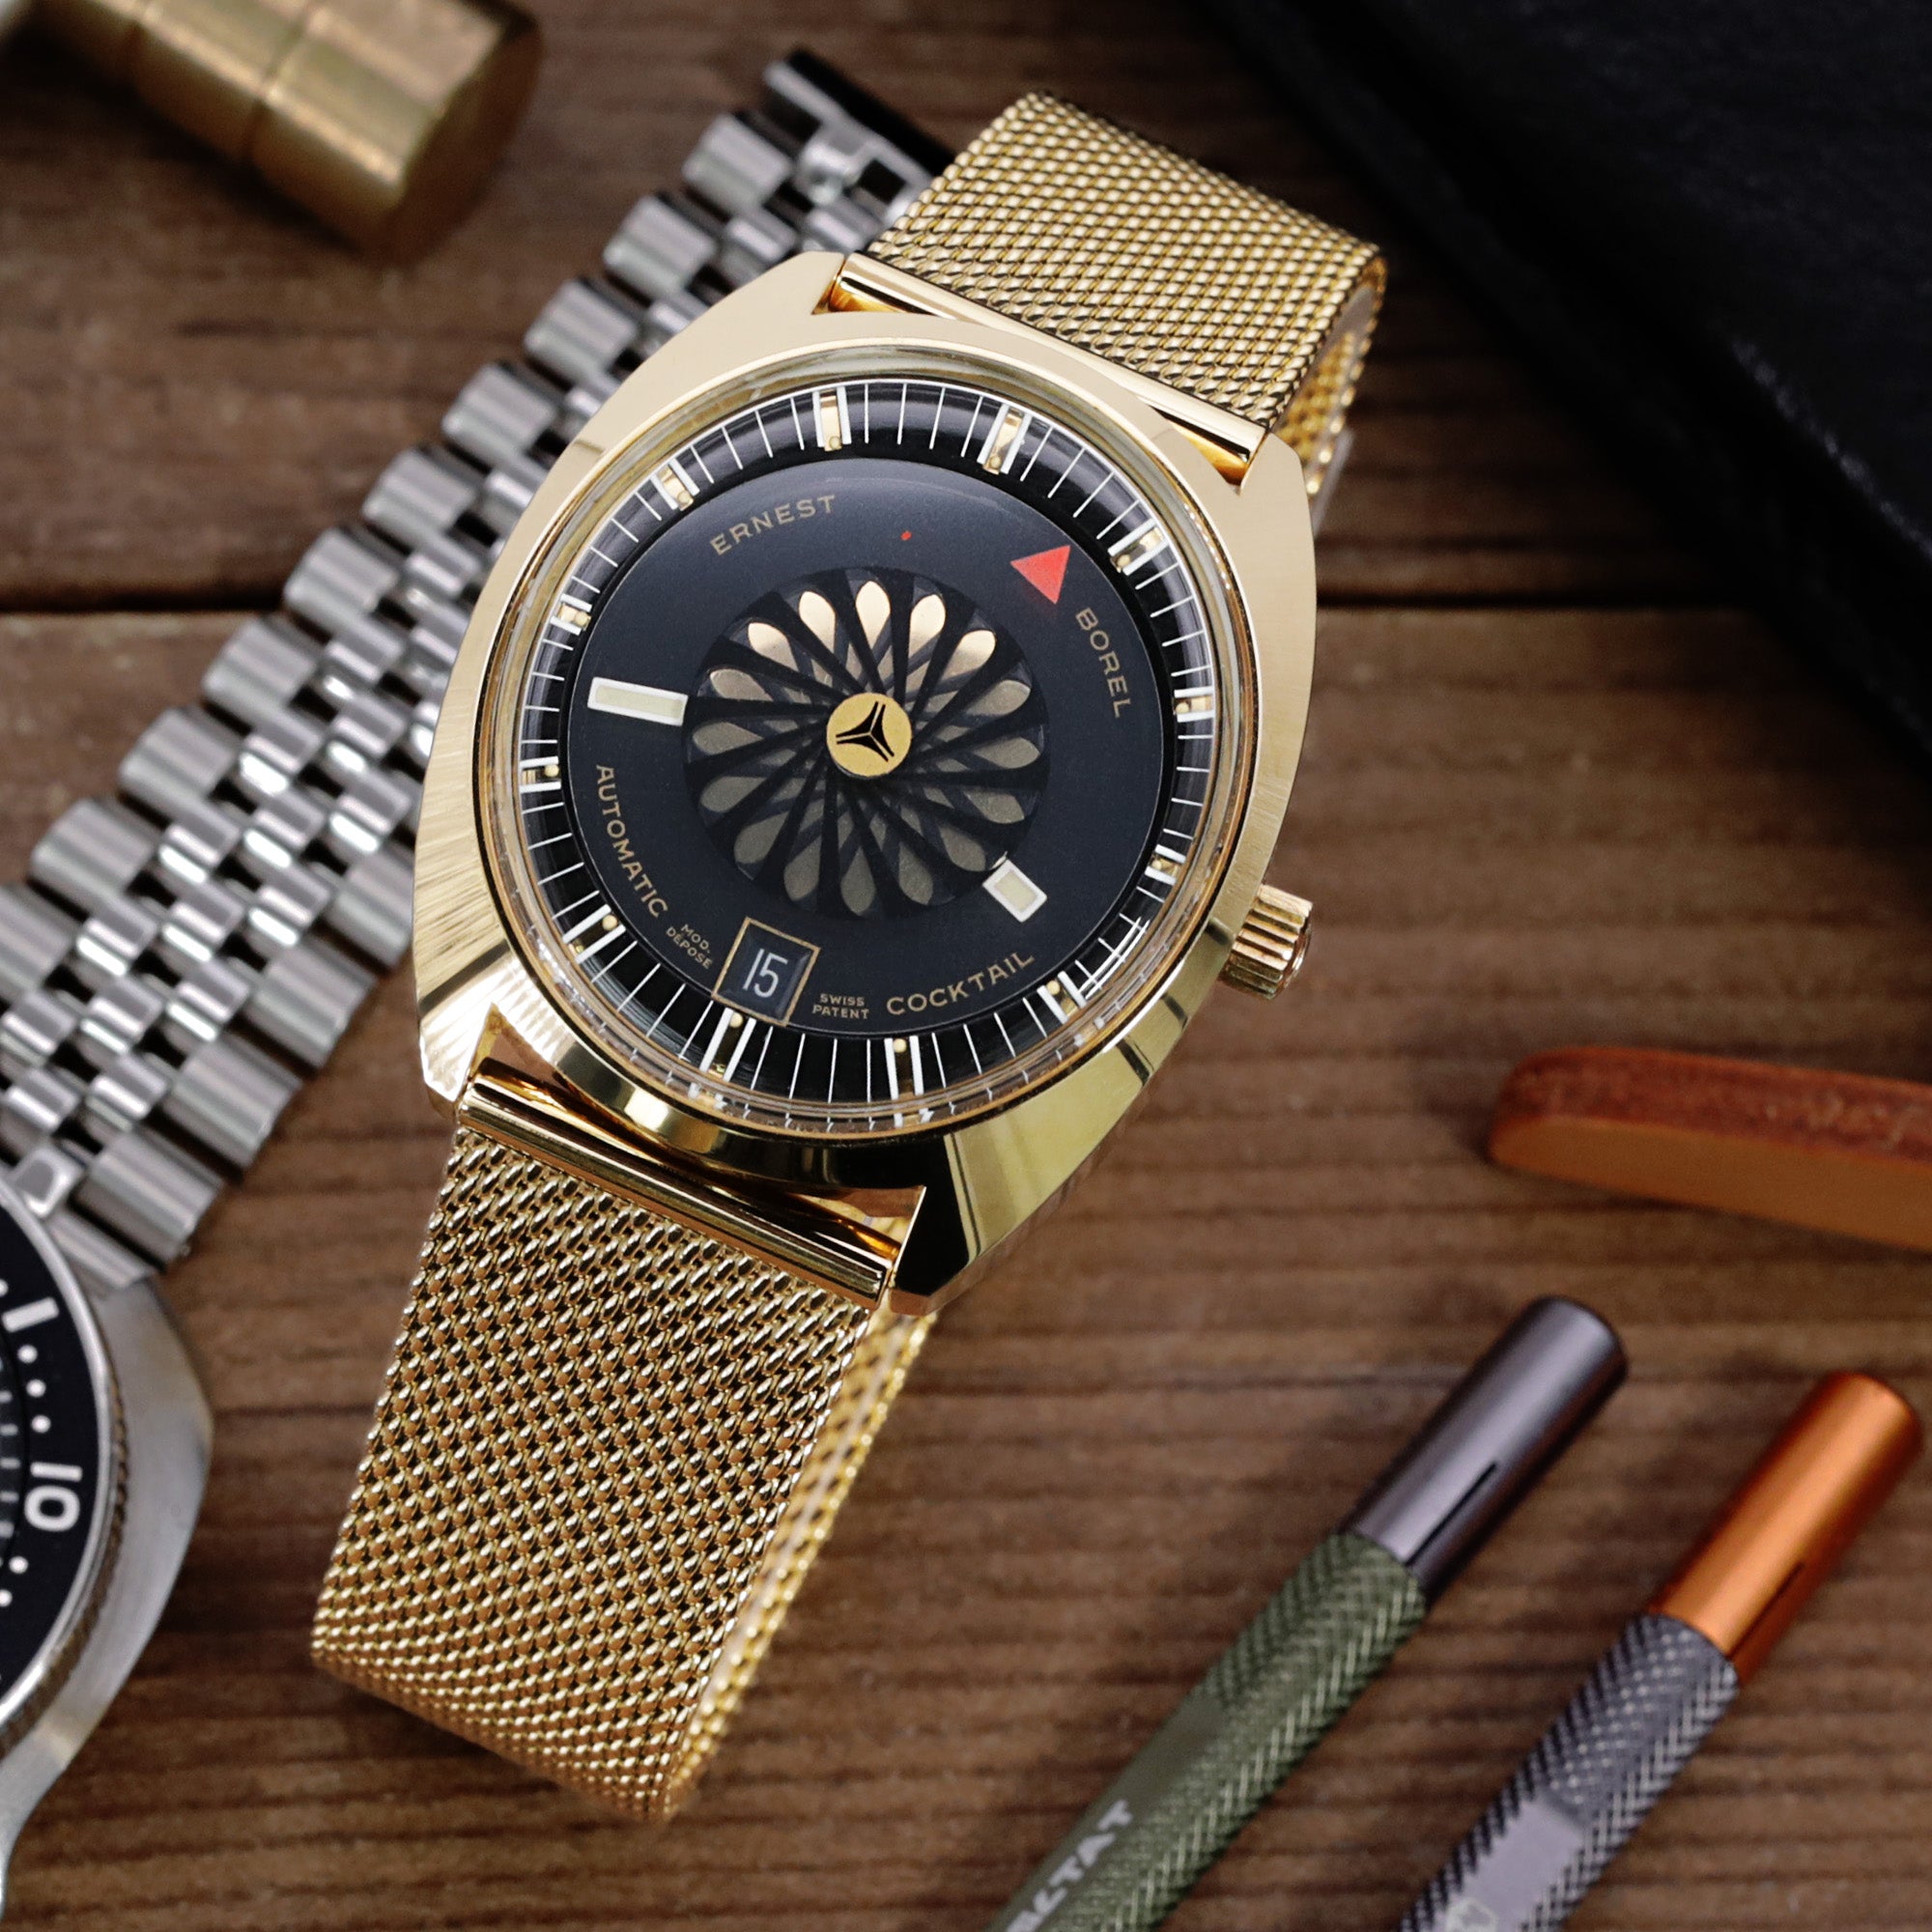 The Gold Mesh watch band by Strapcode